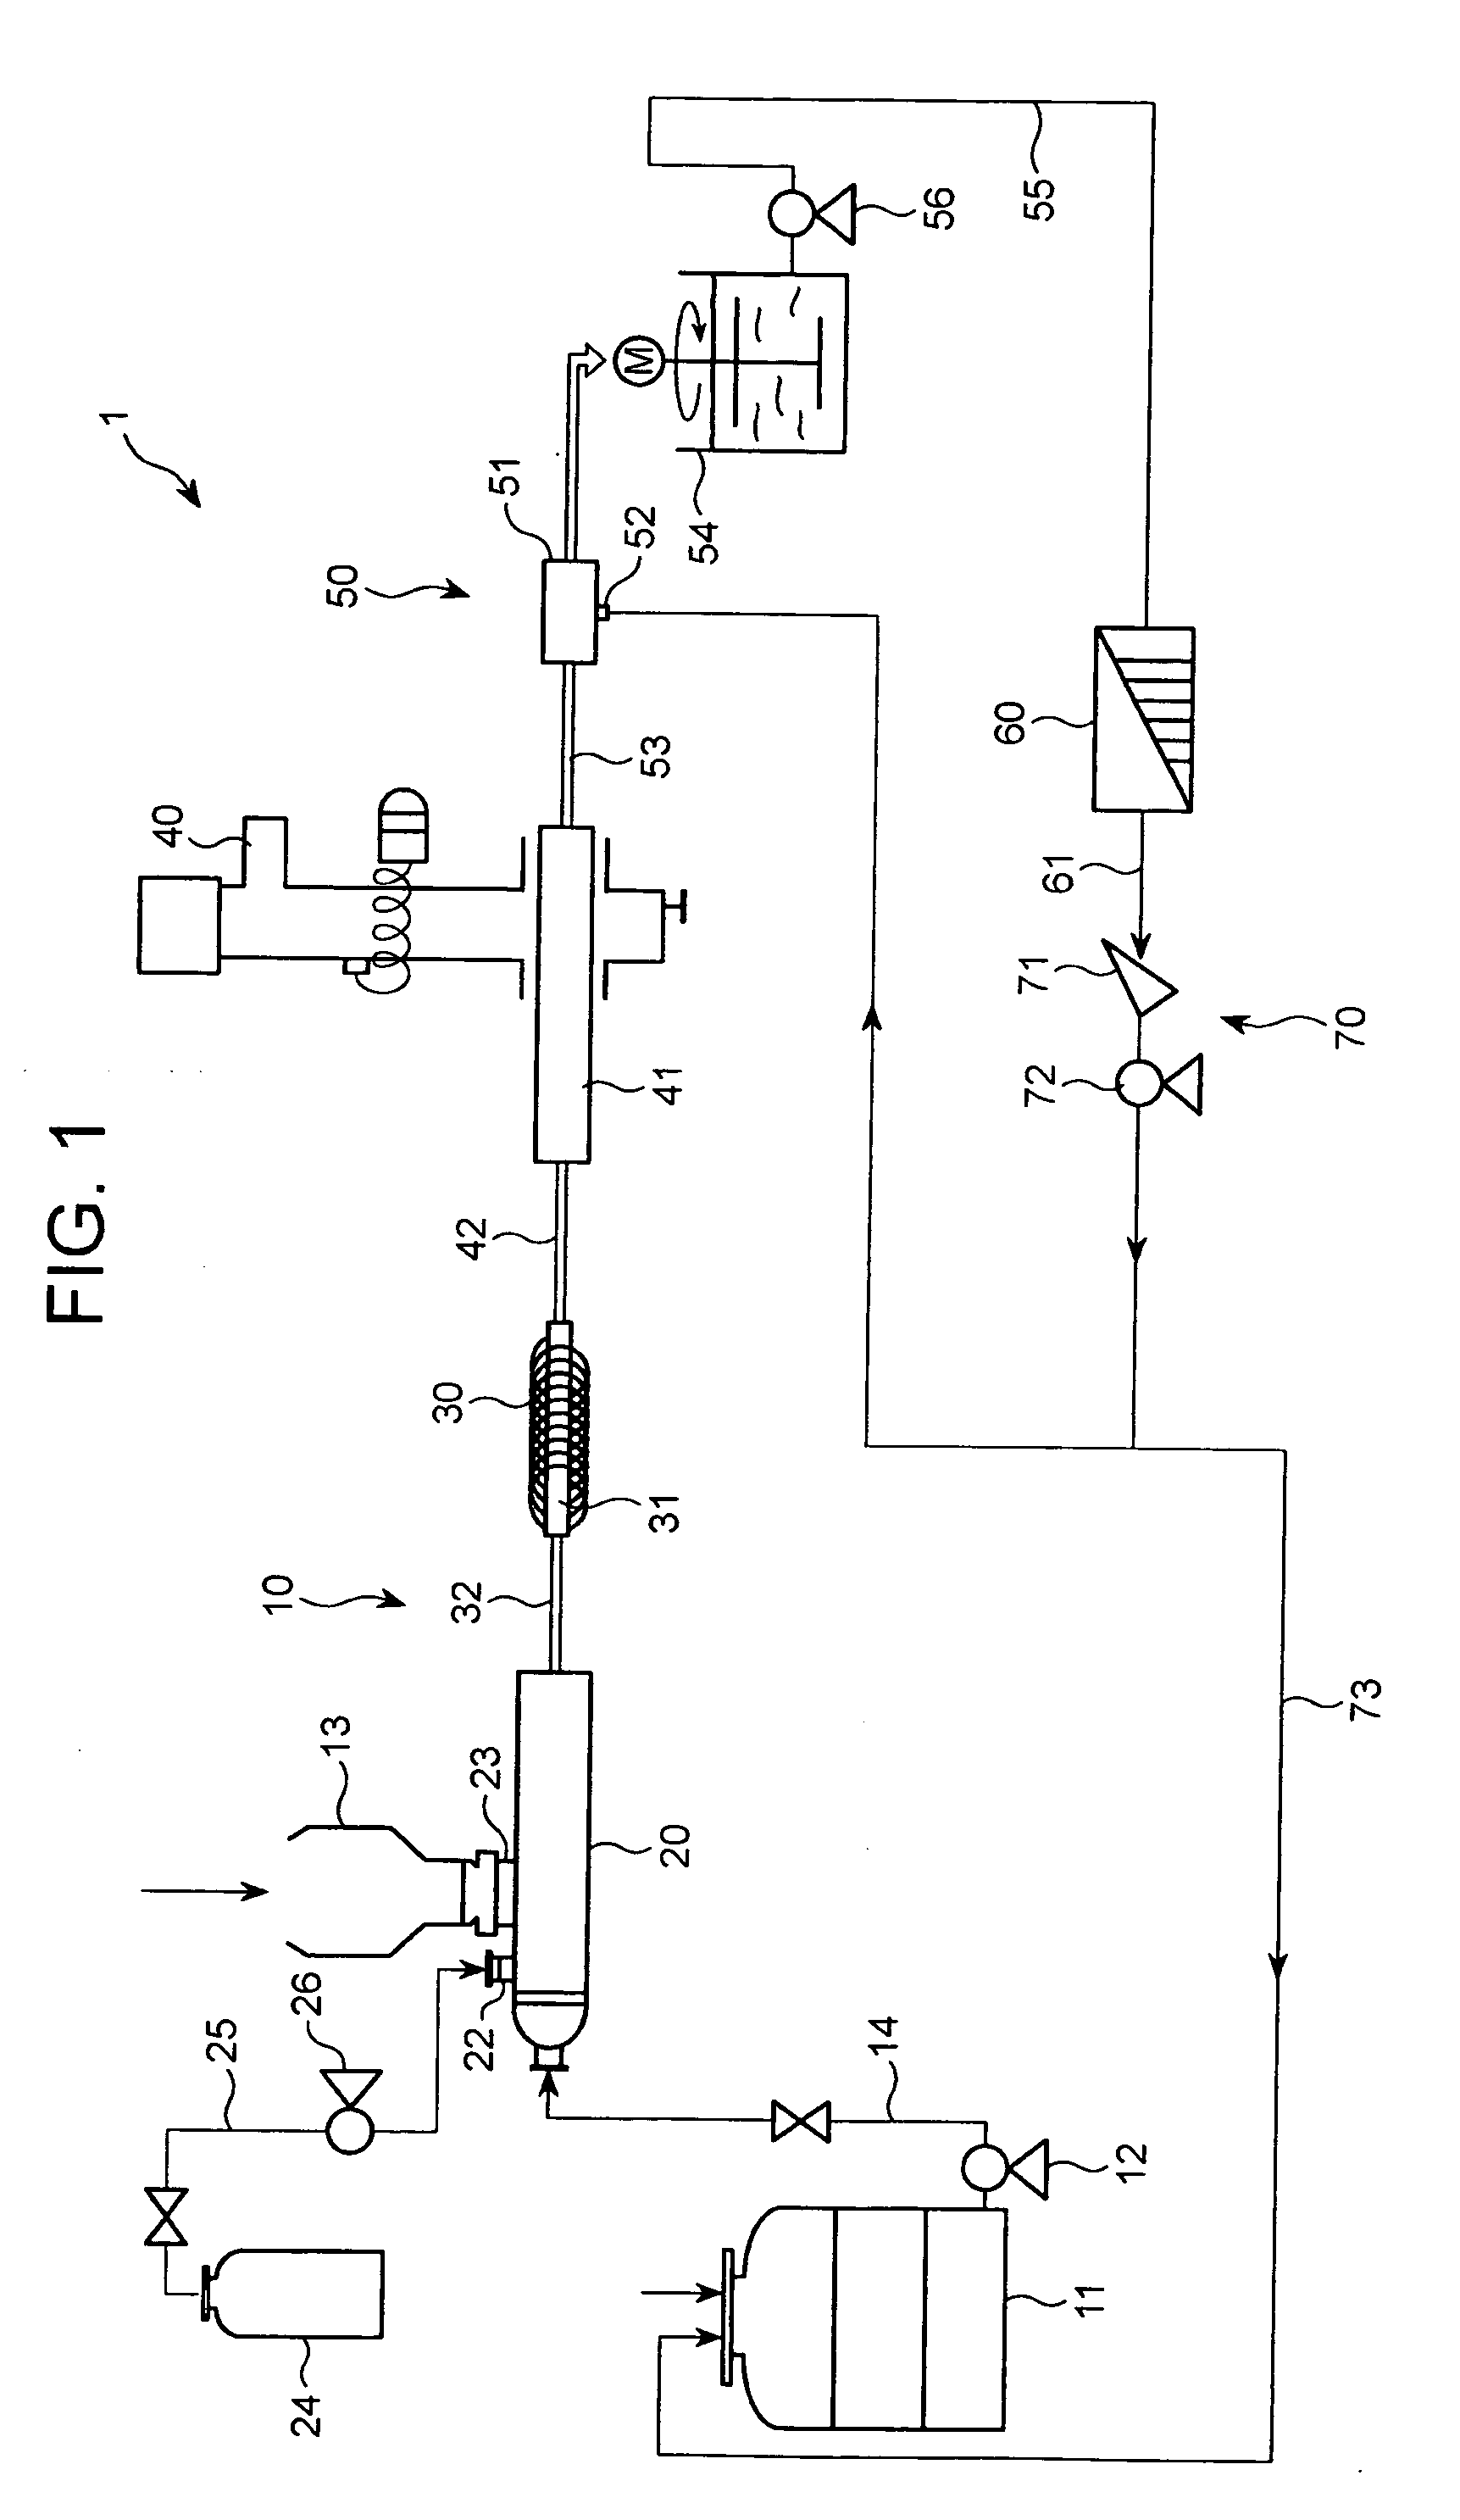 Apparatus for detoxifying compositions containing heavy metal and a method of detoxification